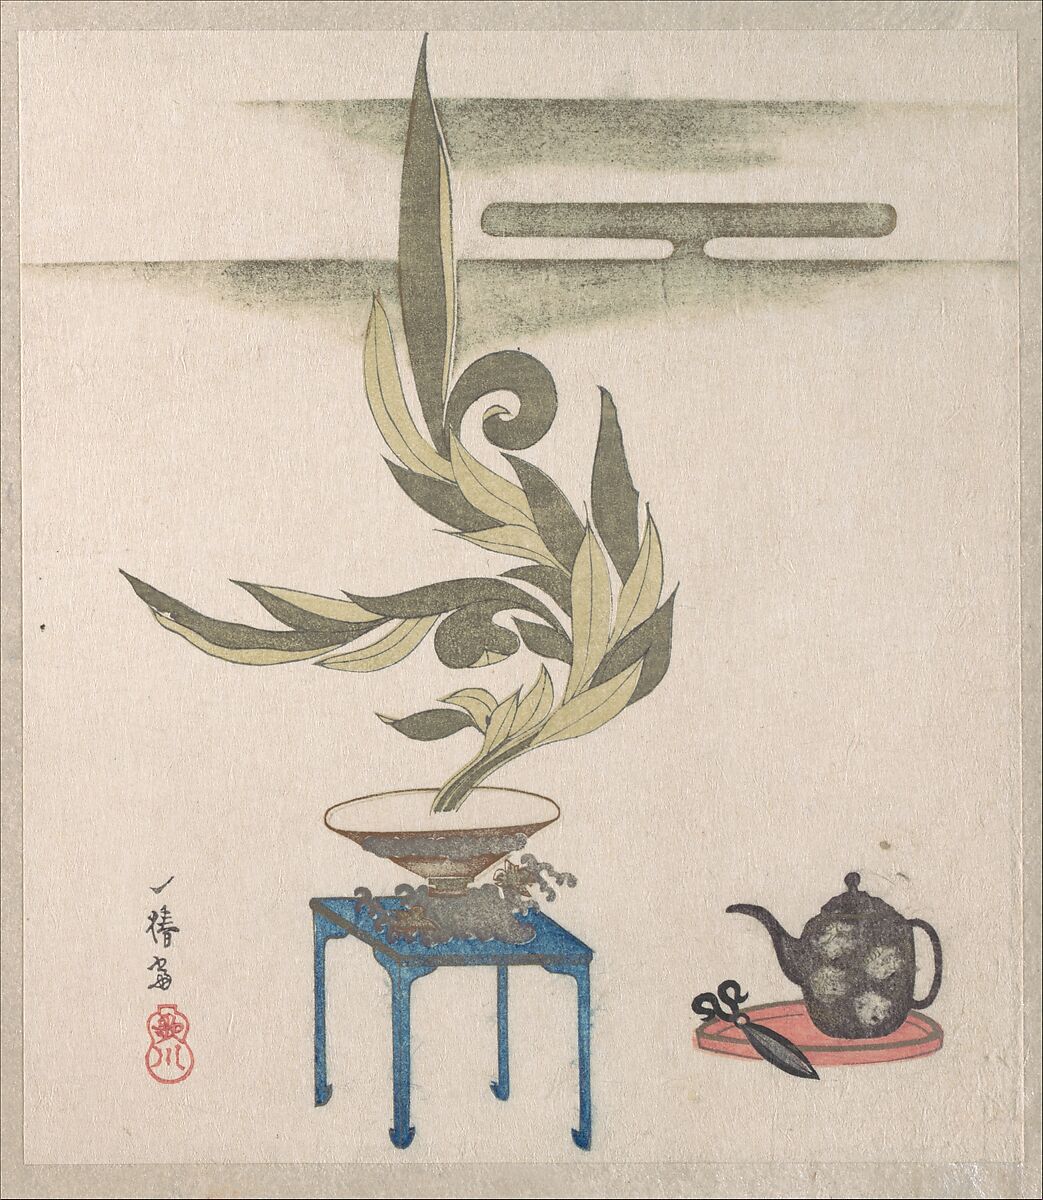 Flower Arrangement, Utagawa Itchinsai (Japanese, 18th–19th century), Part of an album of woodblock prints (surimono); ink and color on paper, Japan 